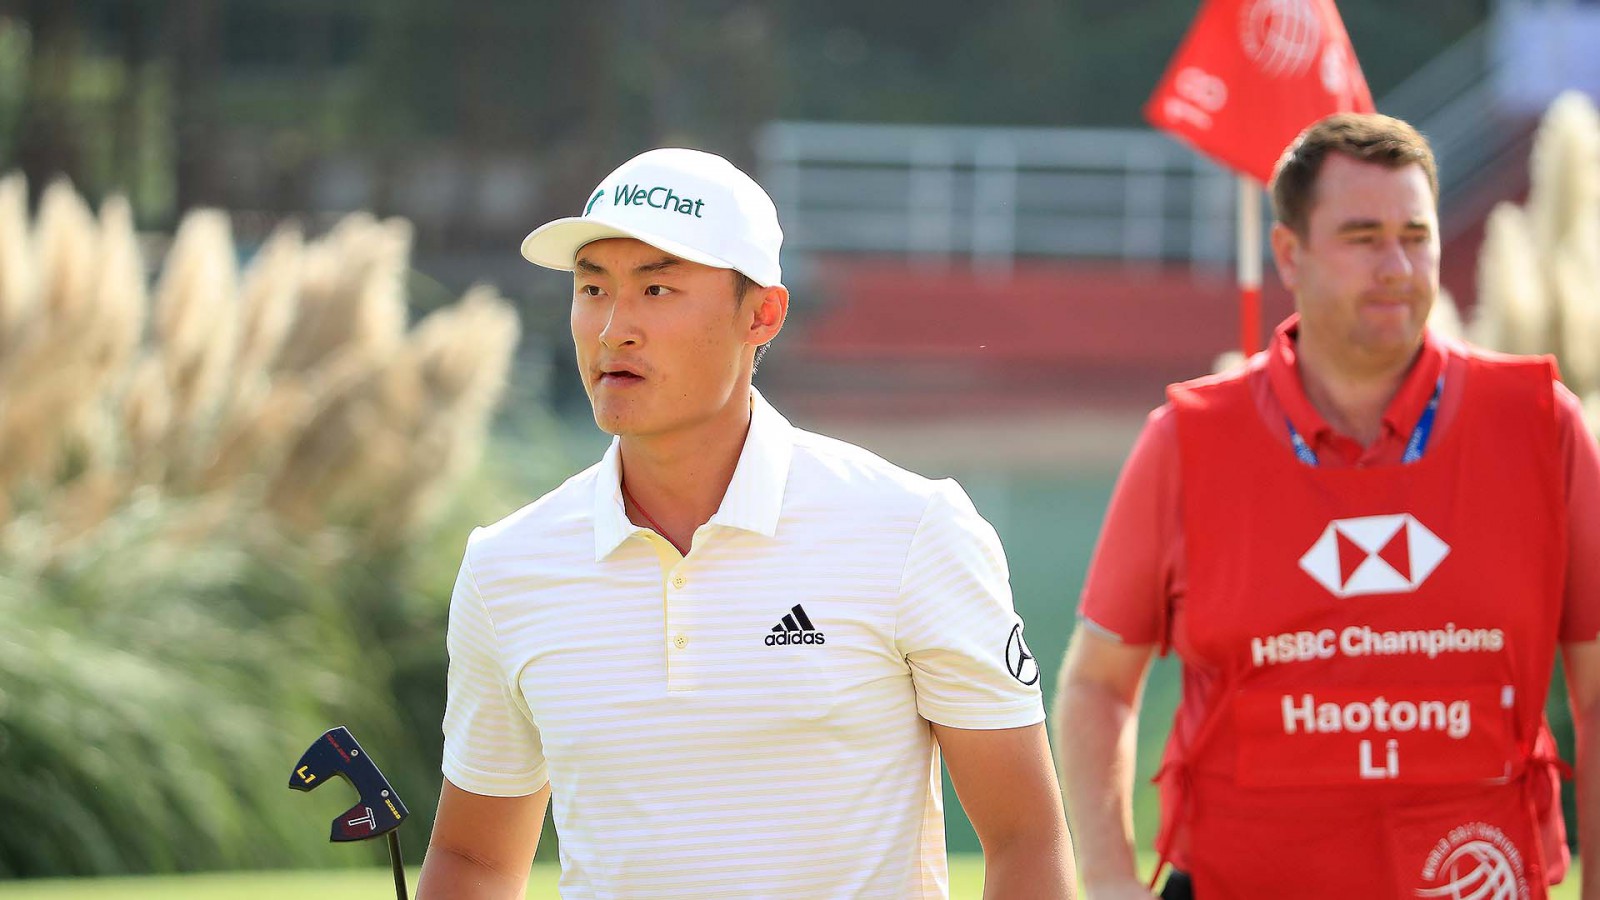 Haotong Li hits SHOCKING bunker shot to end dream of home win at WGC